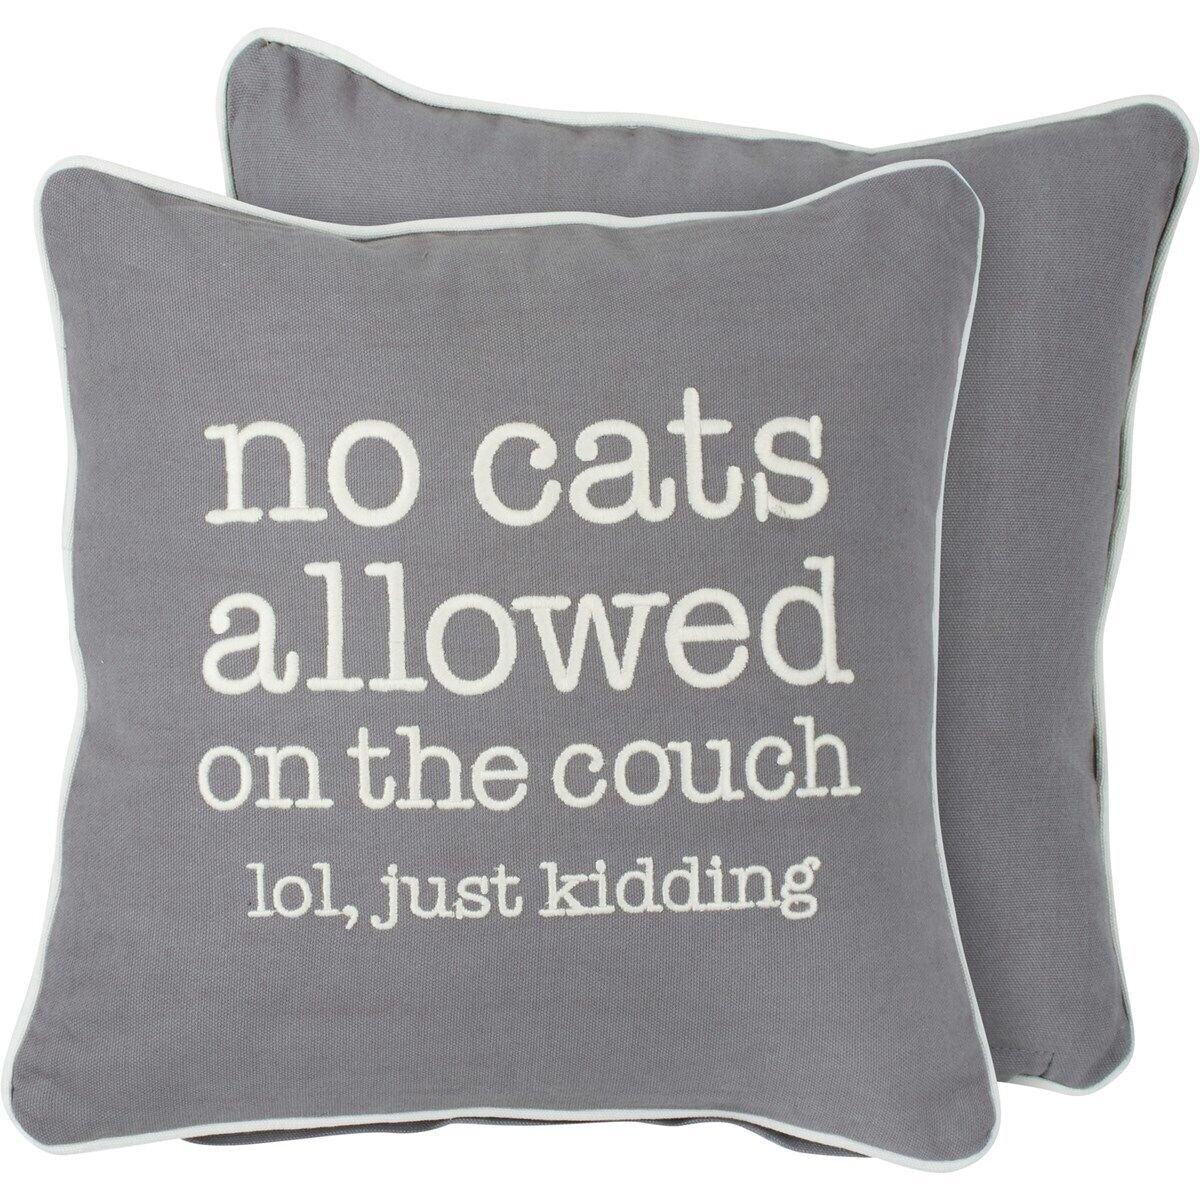 Primitives by Kathy - No Cats Allowed/ Just Kidding Pillow - 115155 Primitives by Kathy 115155